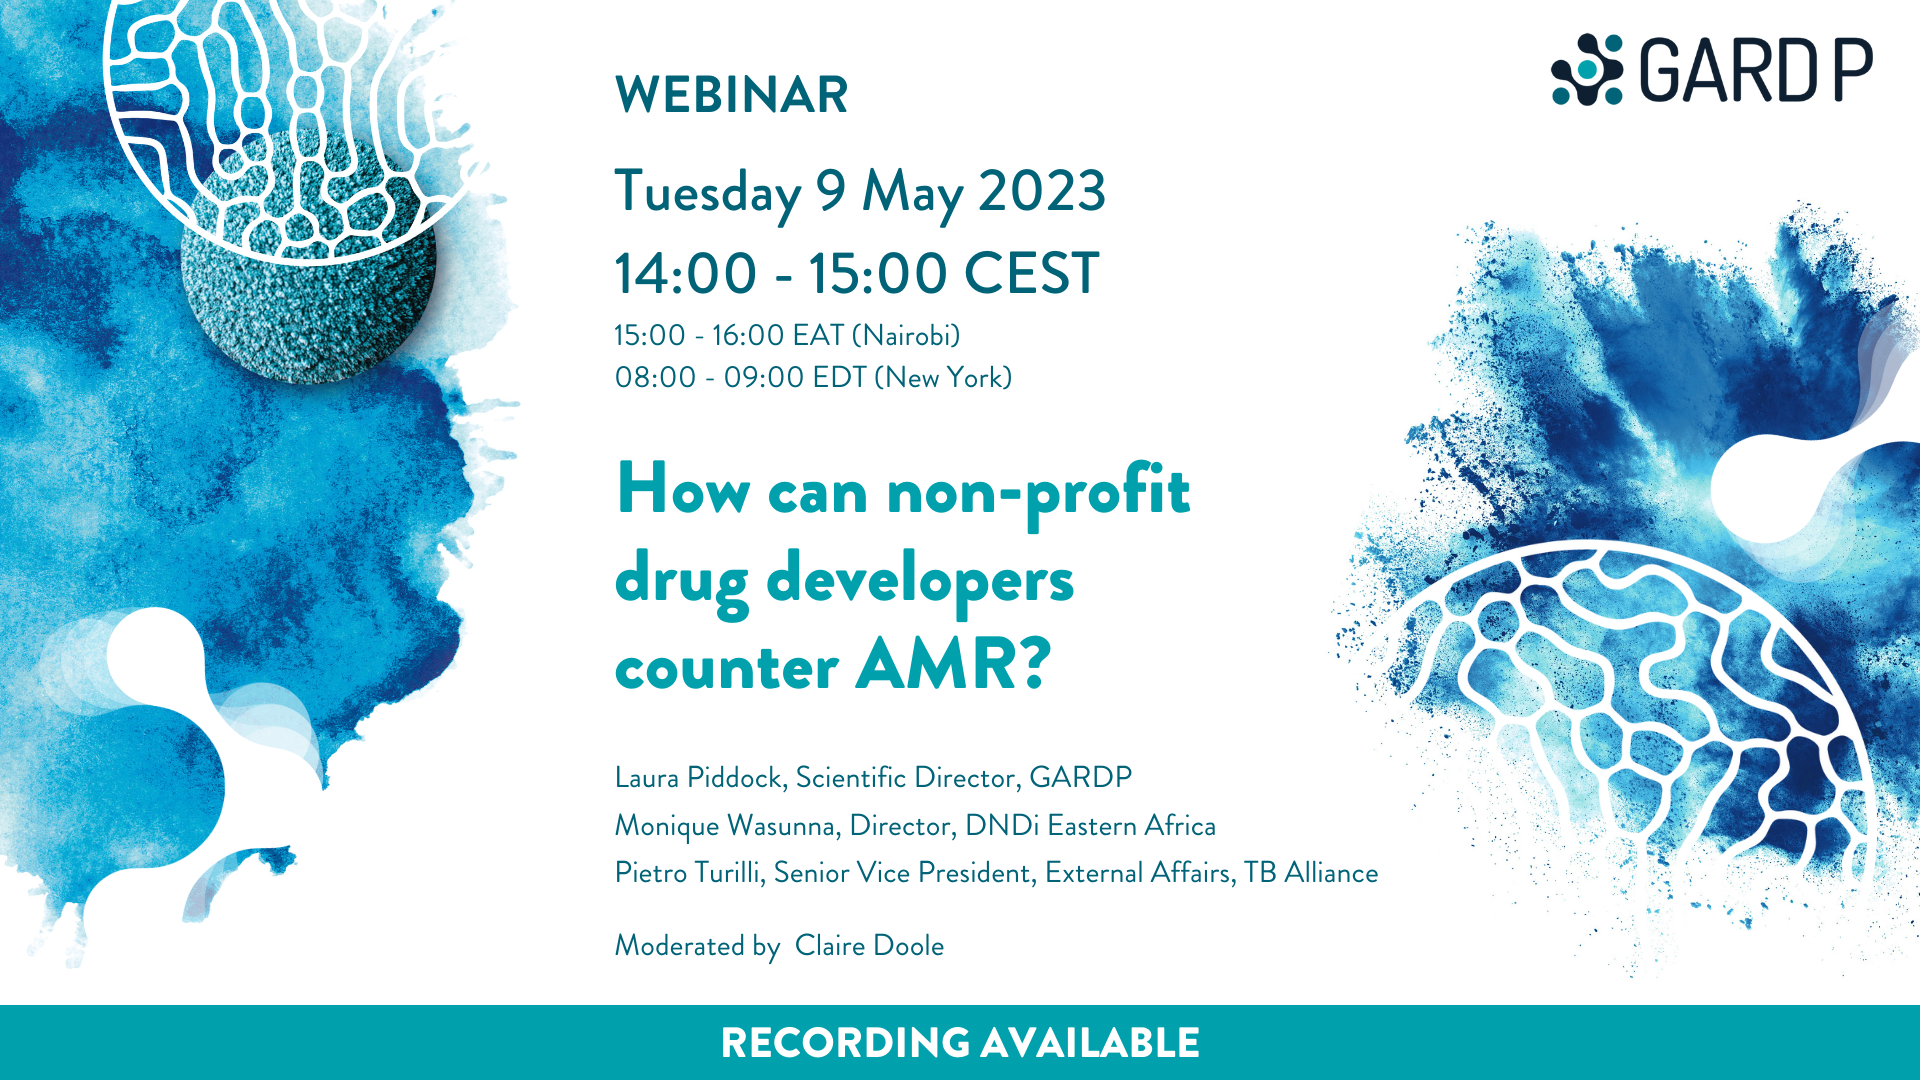 How can non-profit drug developers counter AMR?